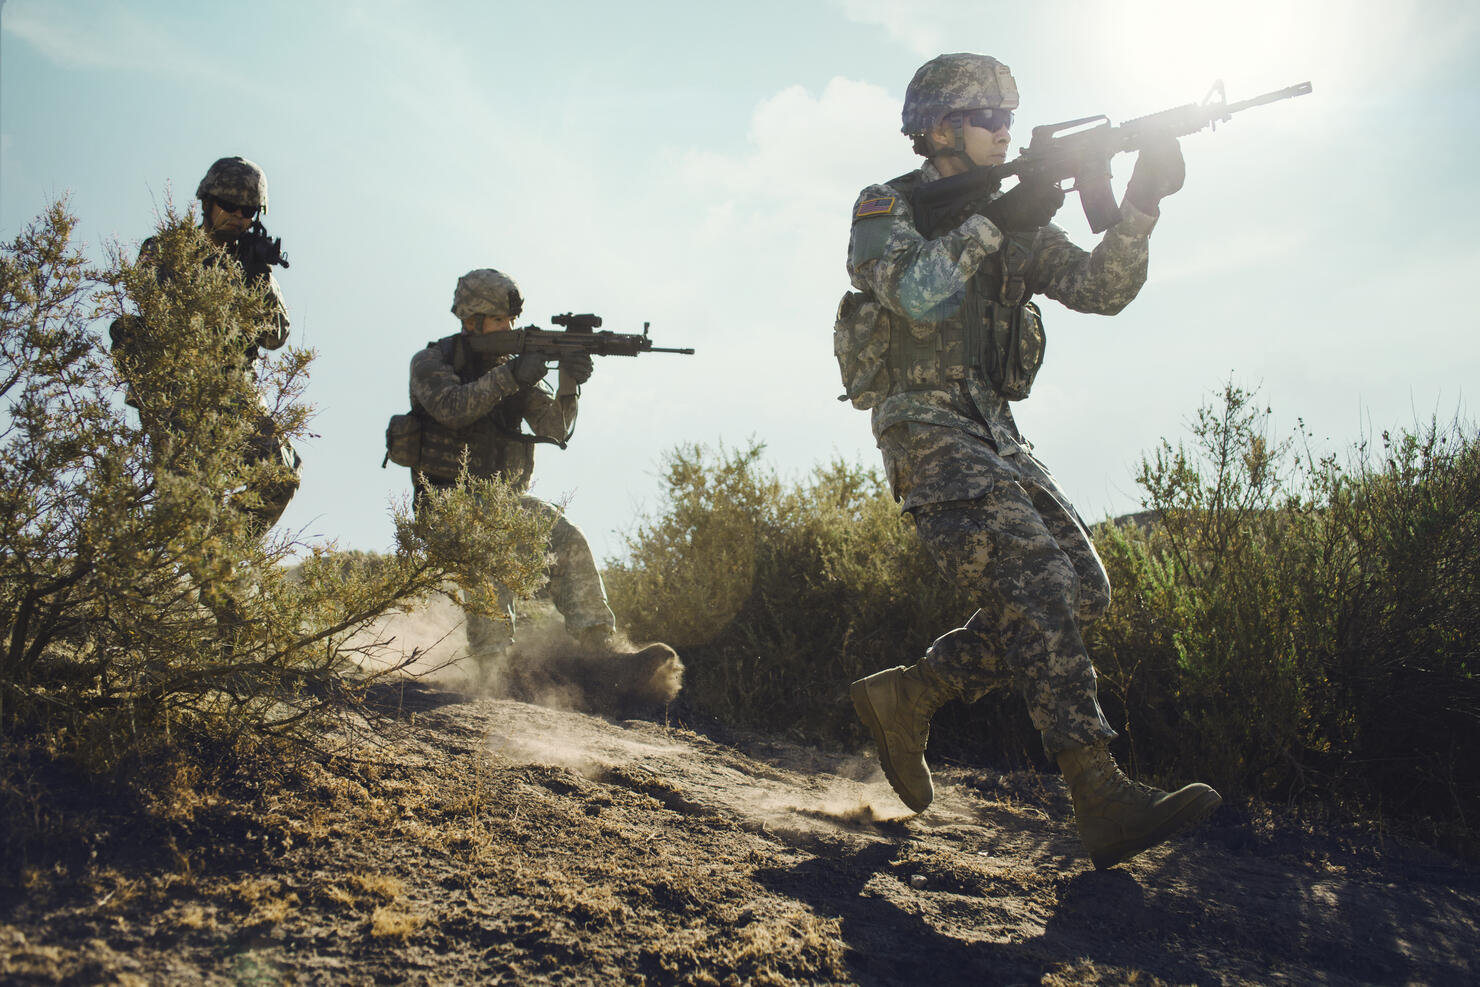 Army soldiers advancing in combat.